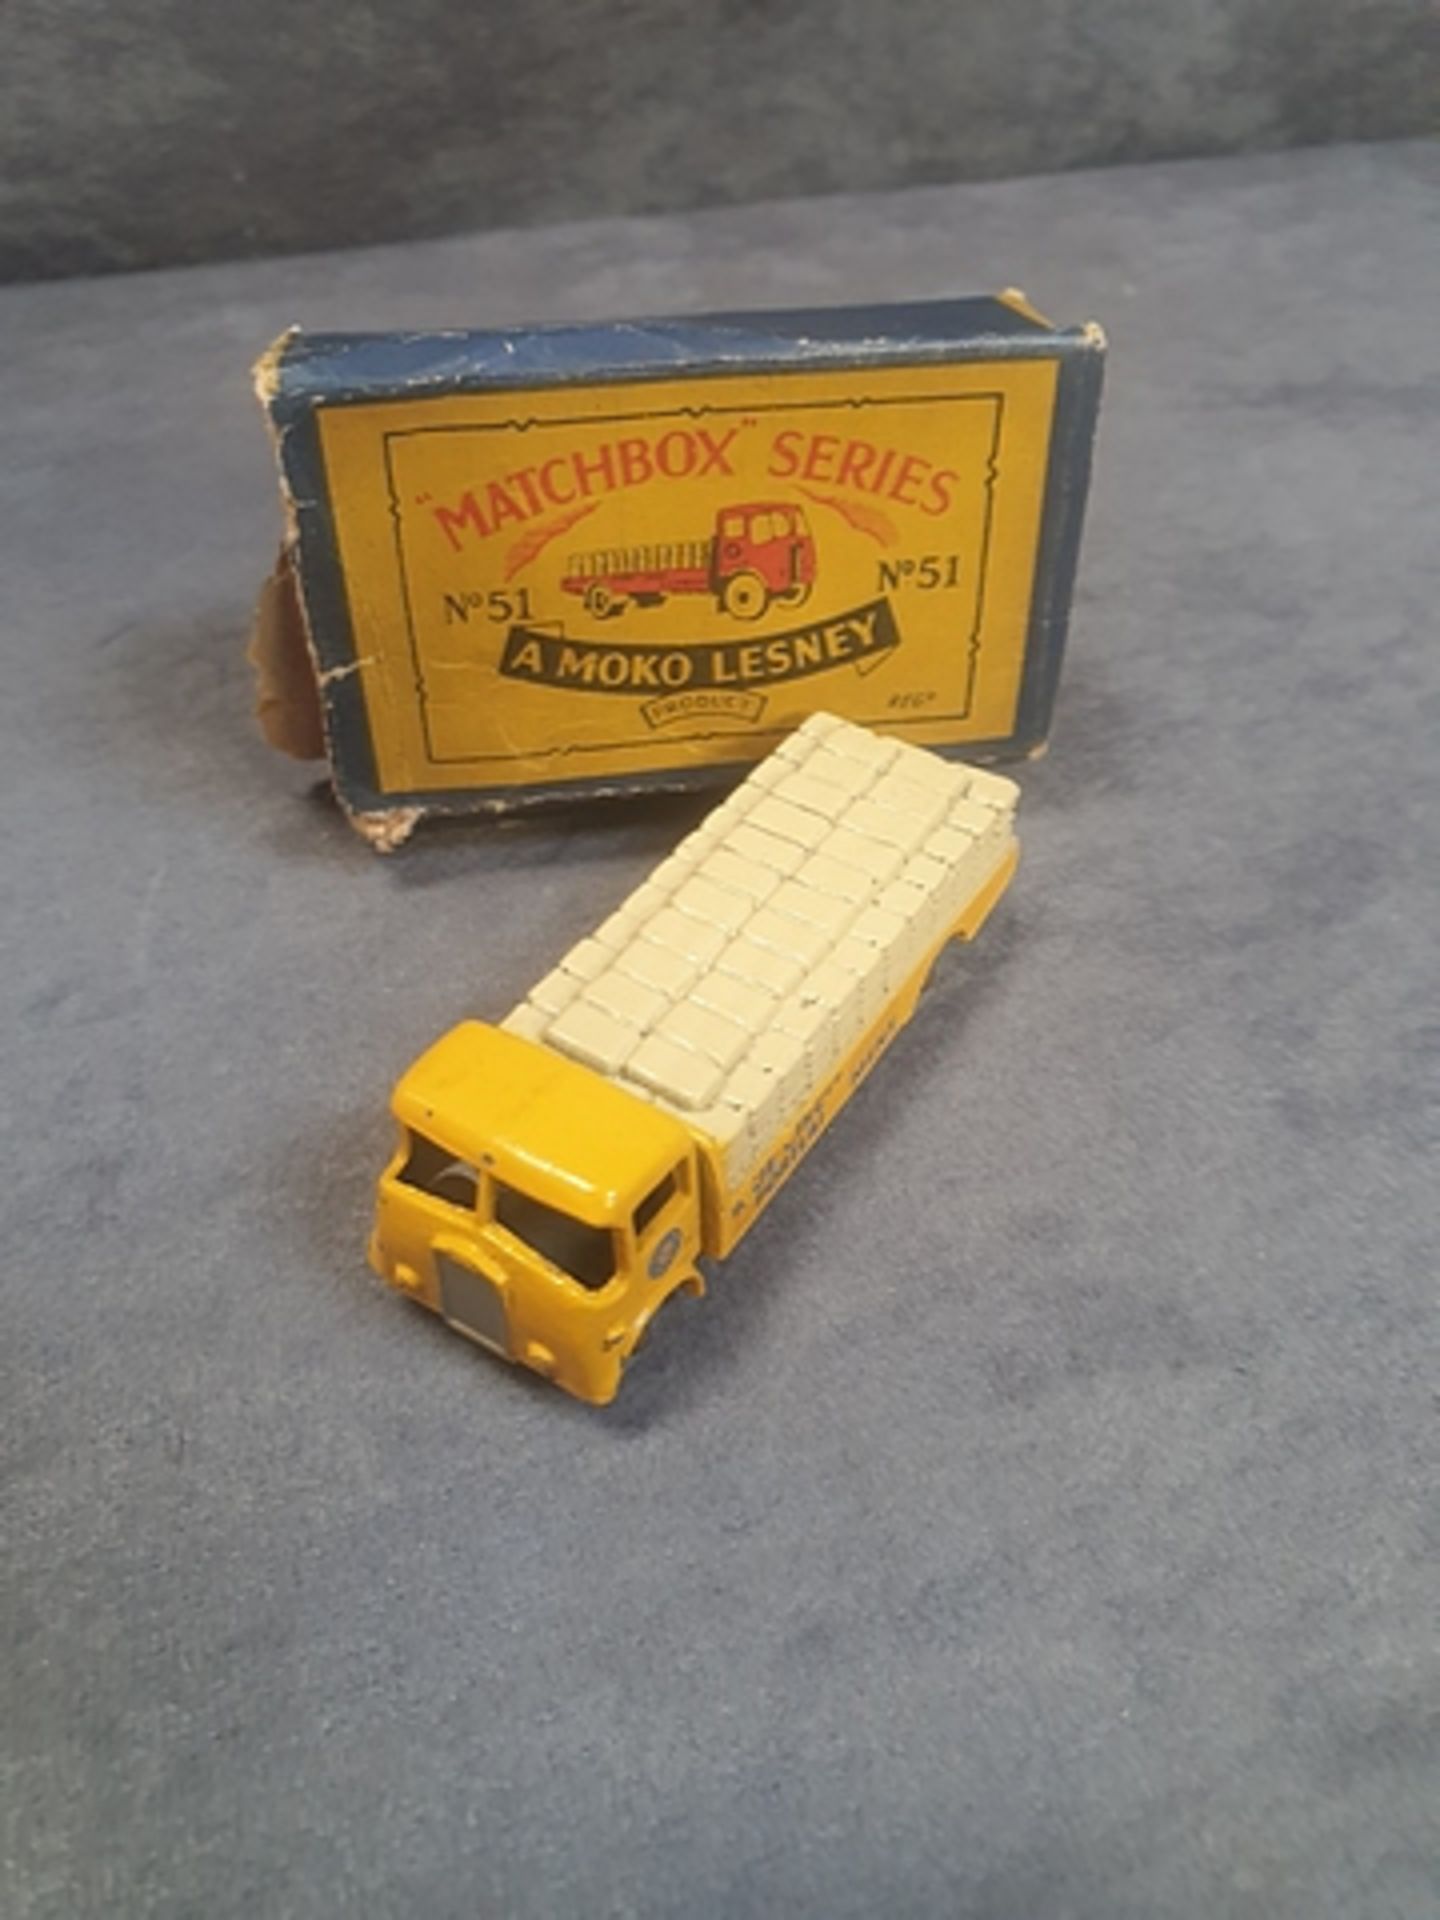 Matchbox Lesney Moko #51 Portland Cement Albion Chieftain Truck Completed With Box (Box Is Damaged)